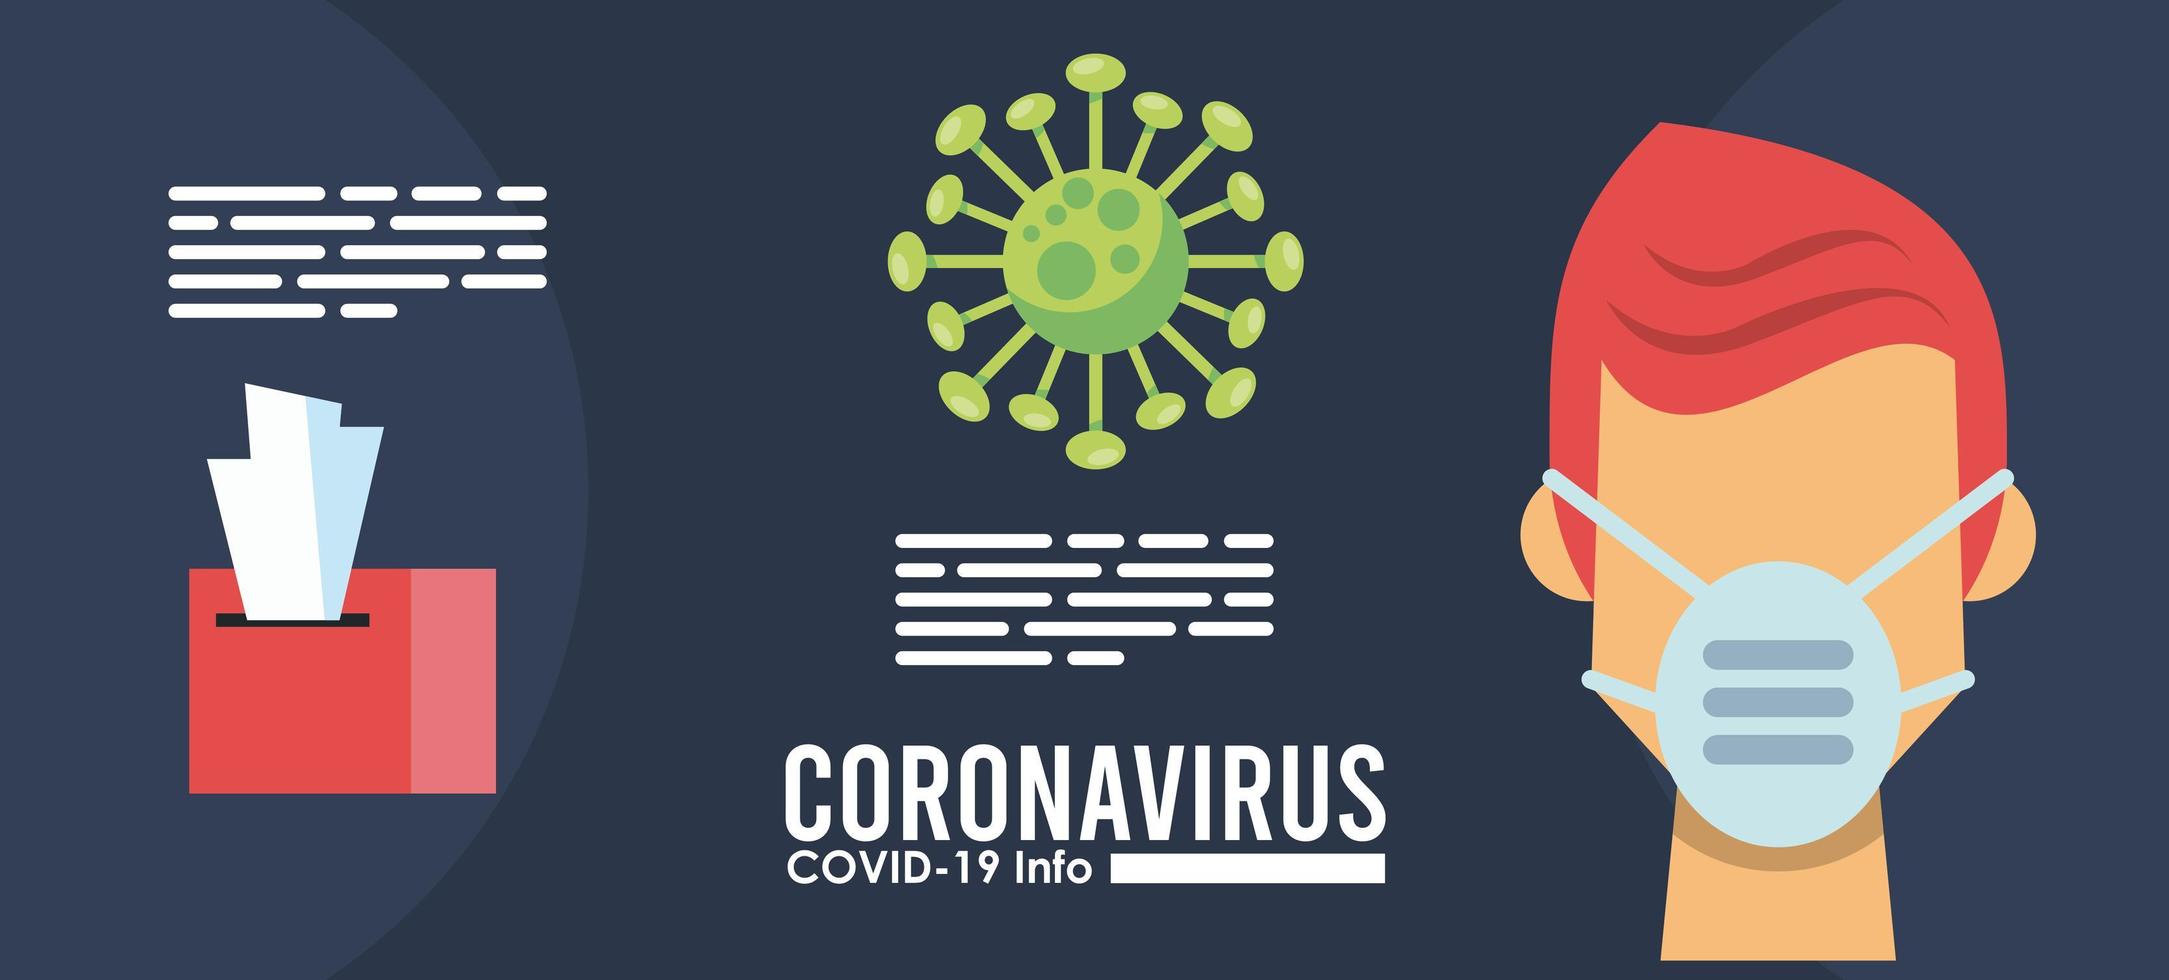 corona virus infographic with person using medical mask vector